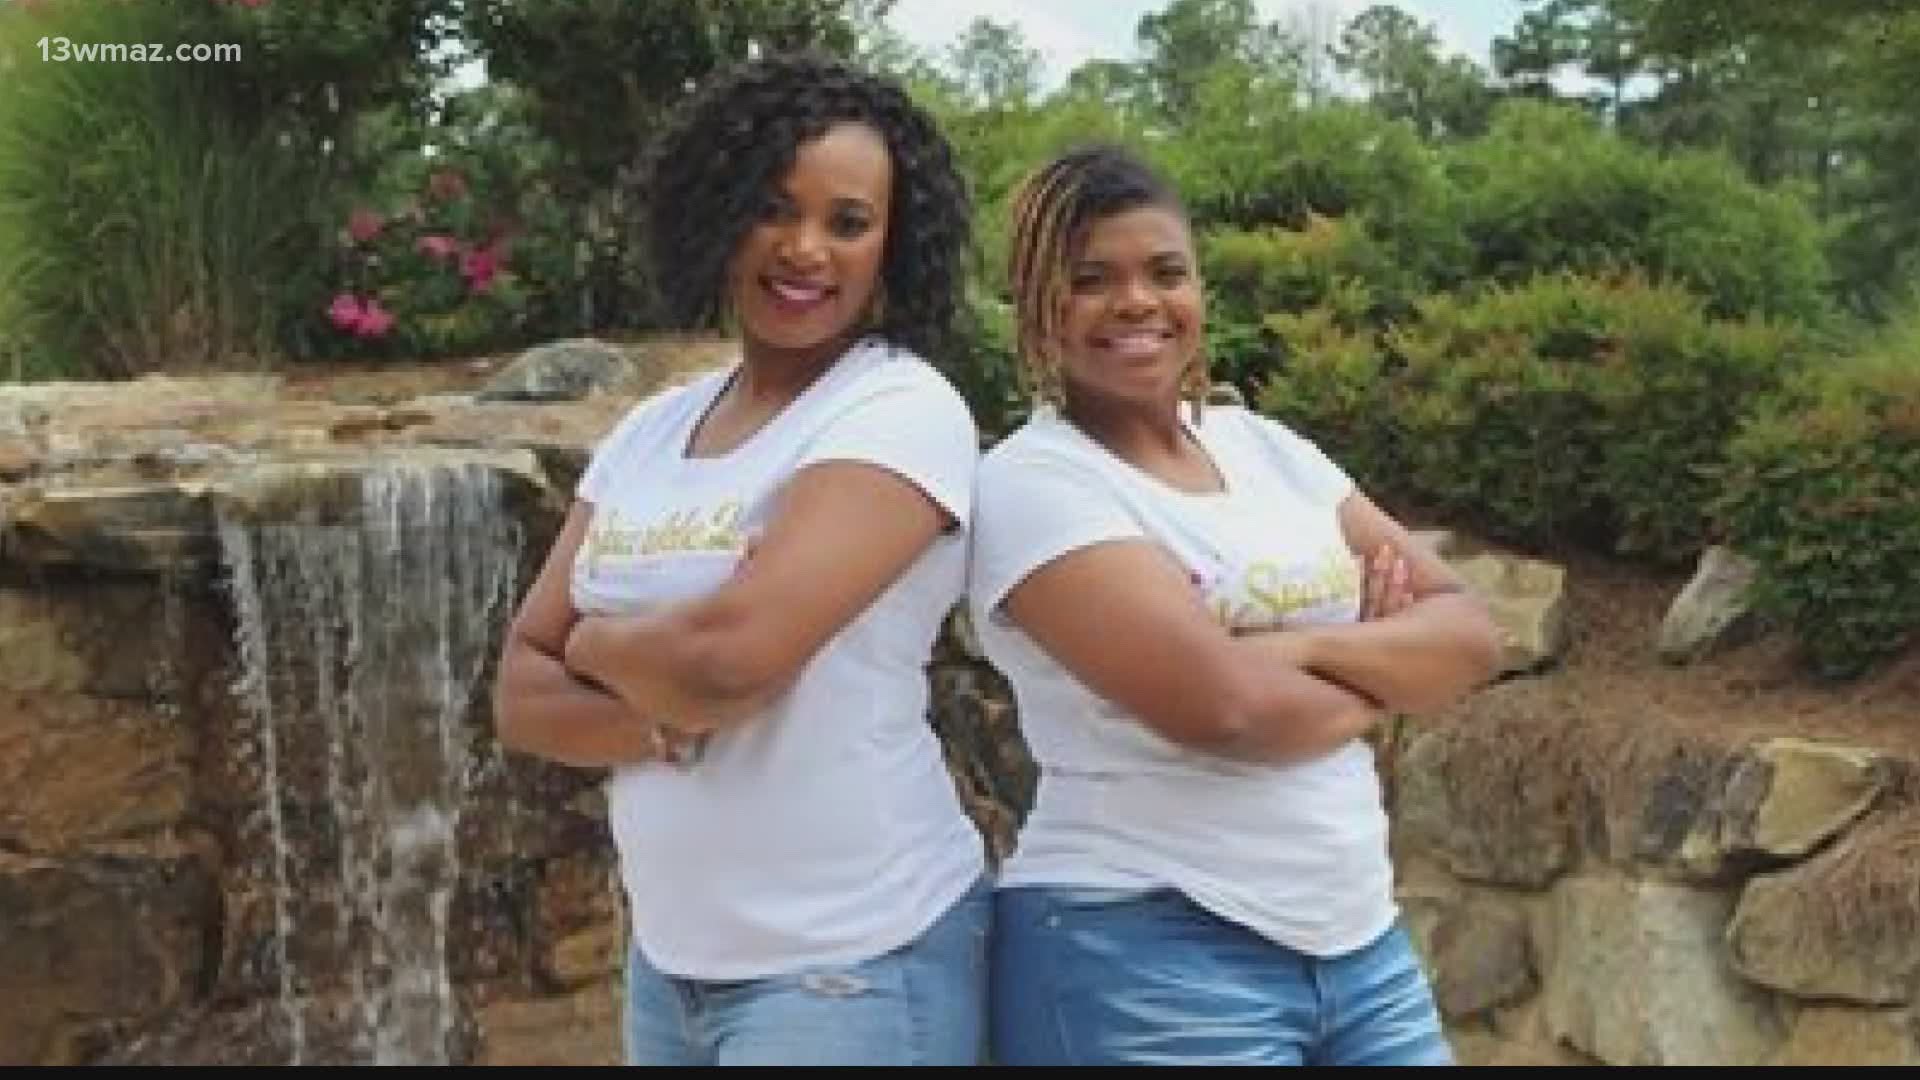 As mothers of teenage girls, Keayana Minus and Natasha Durham have seen first-hand some of the problems girls can face at a young age